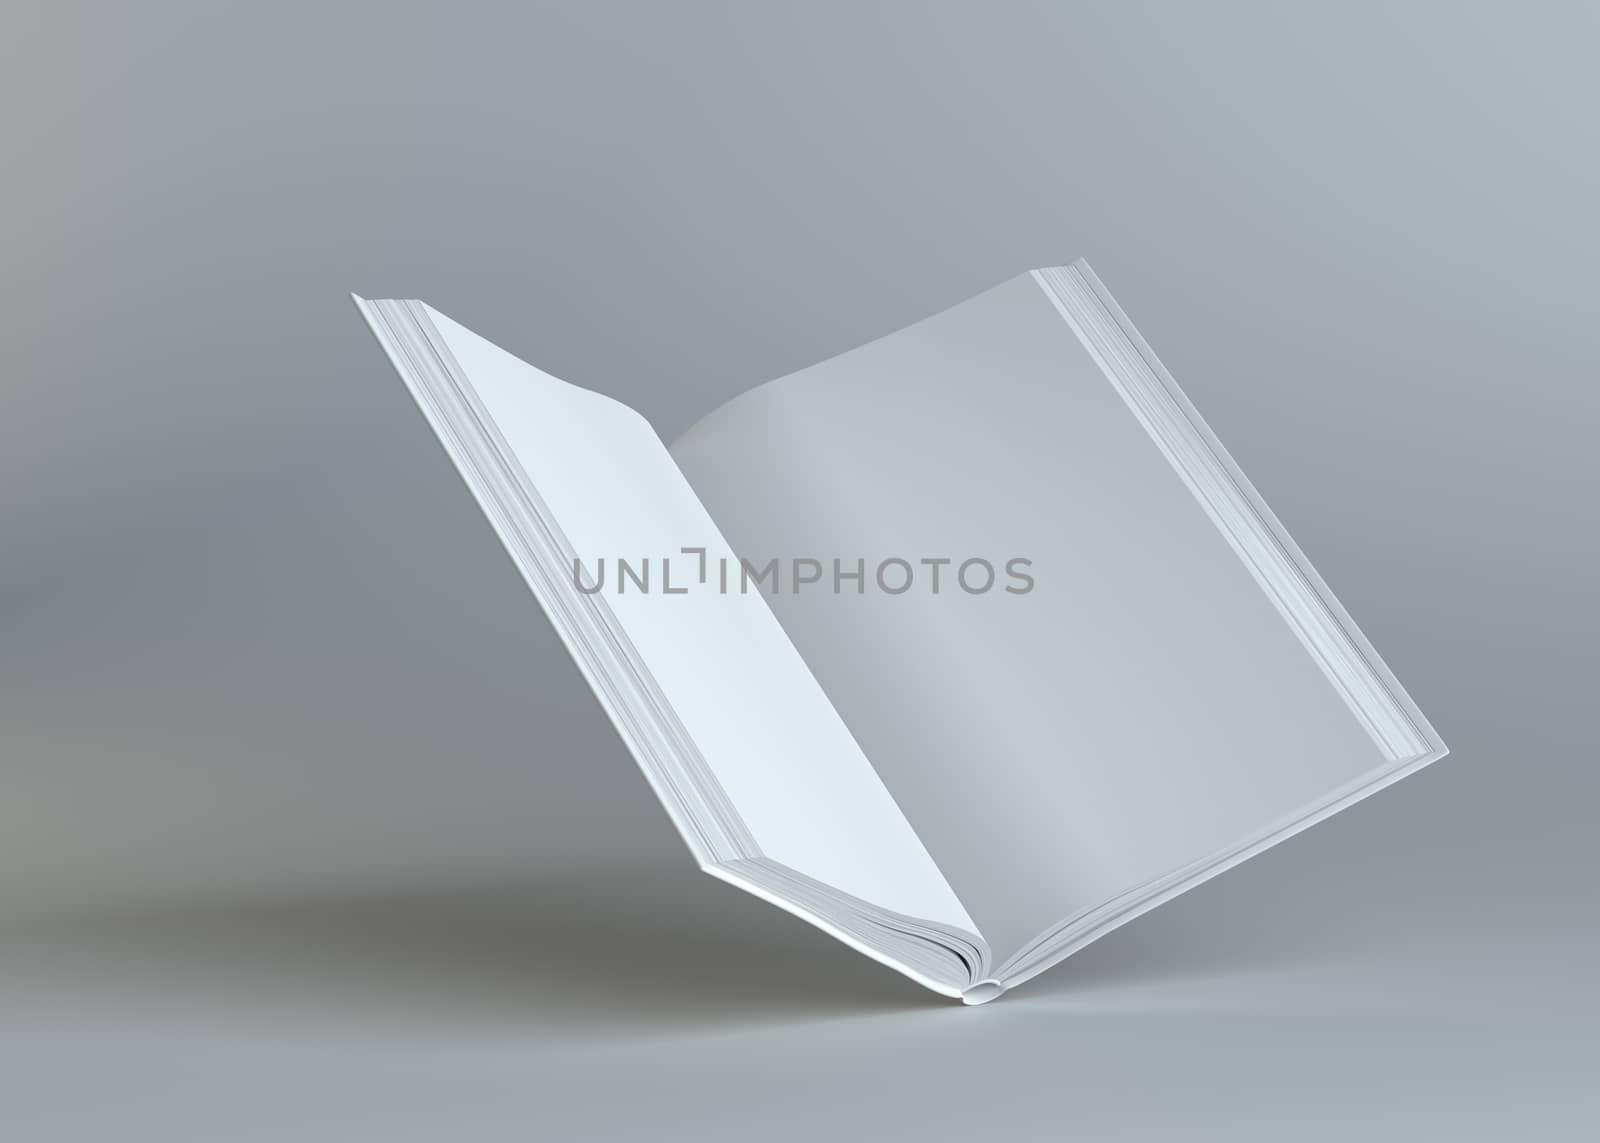 White empty open book on gray background. Template for your content. 3d illustration